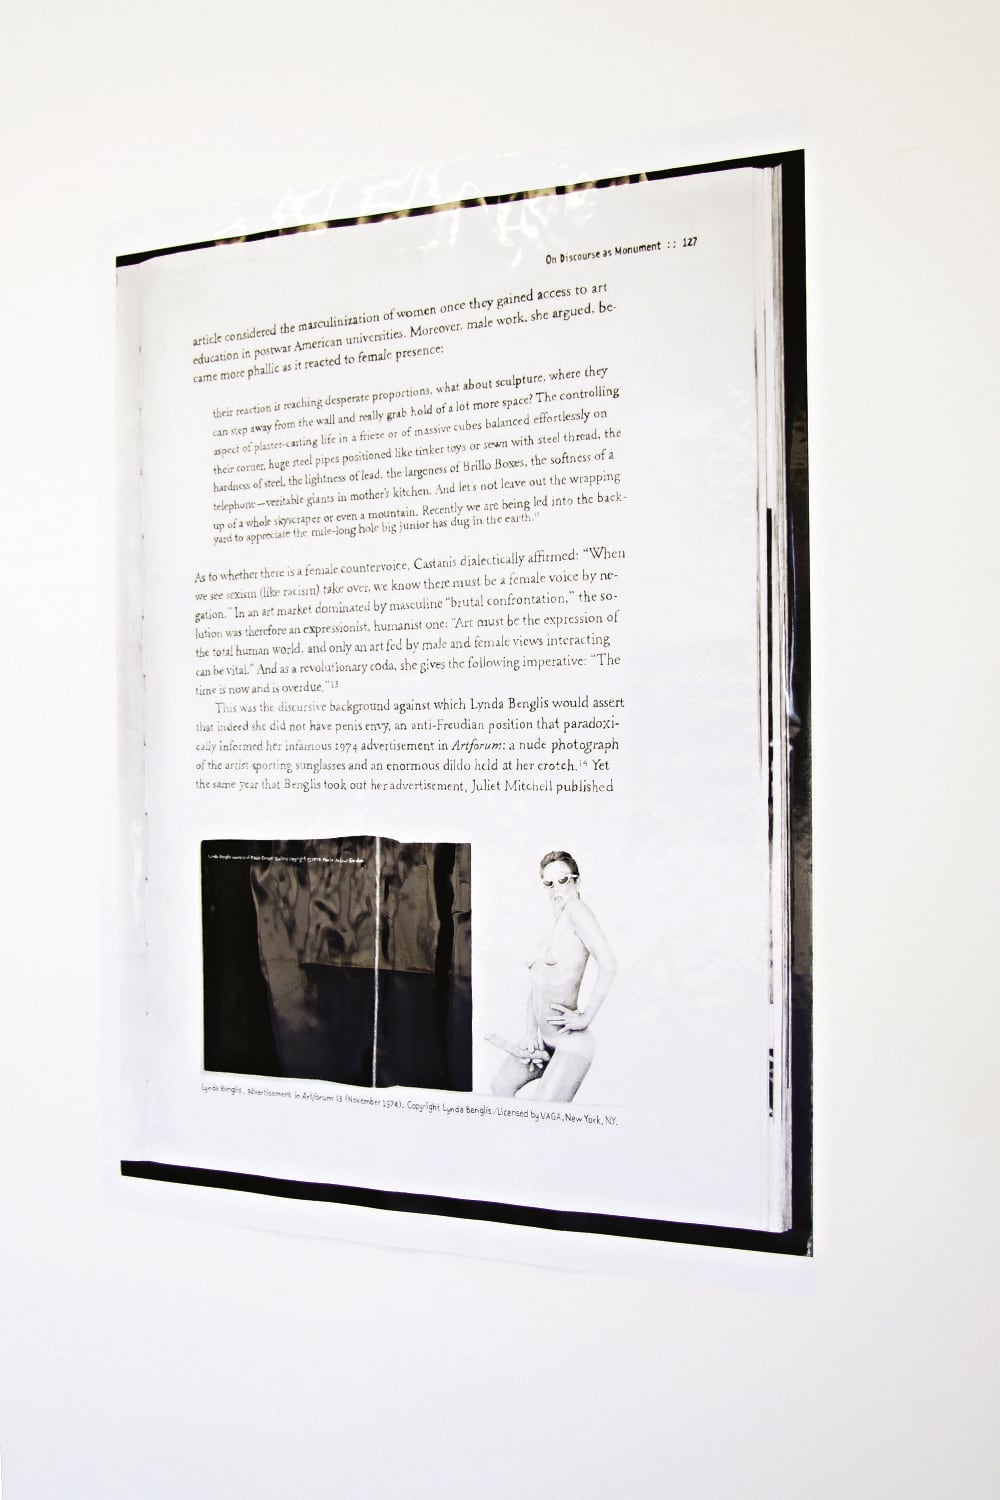 Fiona Macdonald and Thérèse Mastroiacovo, <em>*Access Restricted*</em> 2010, printed poster, Image courtesy the artists, Photo credit: Clare Rae